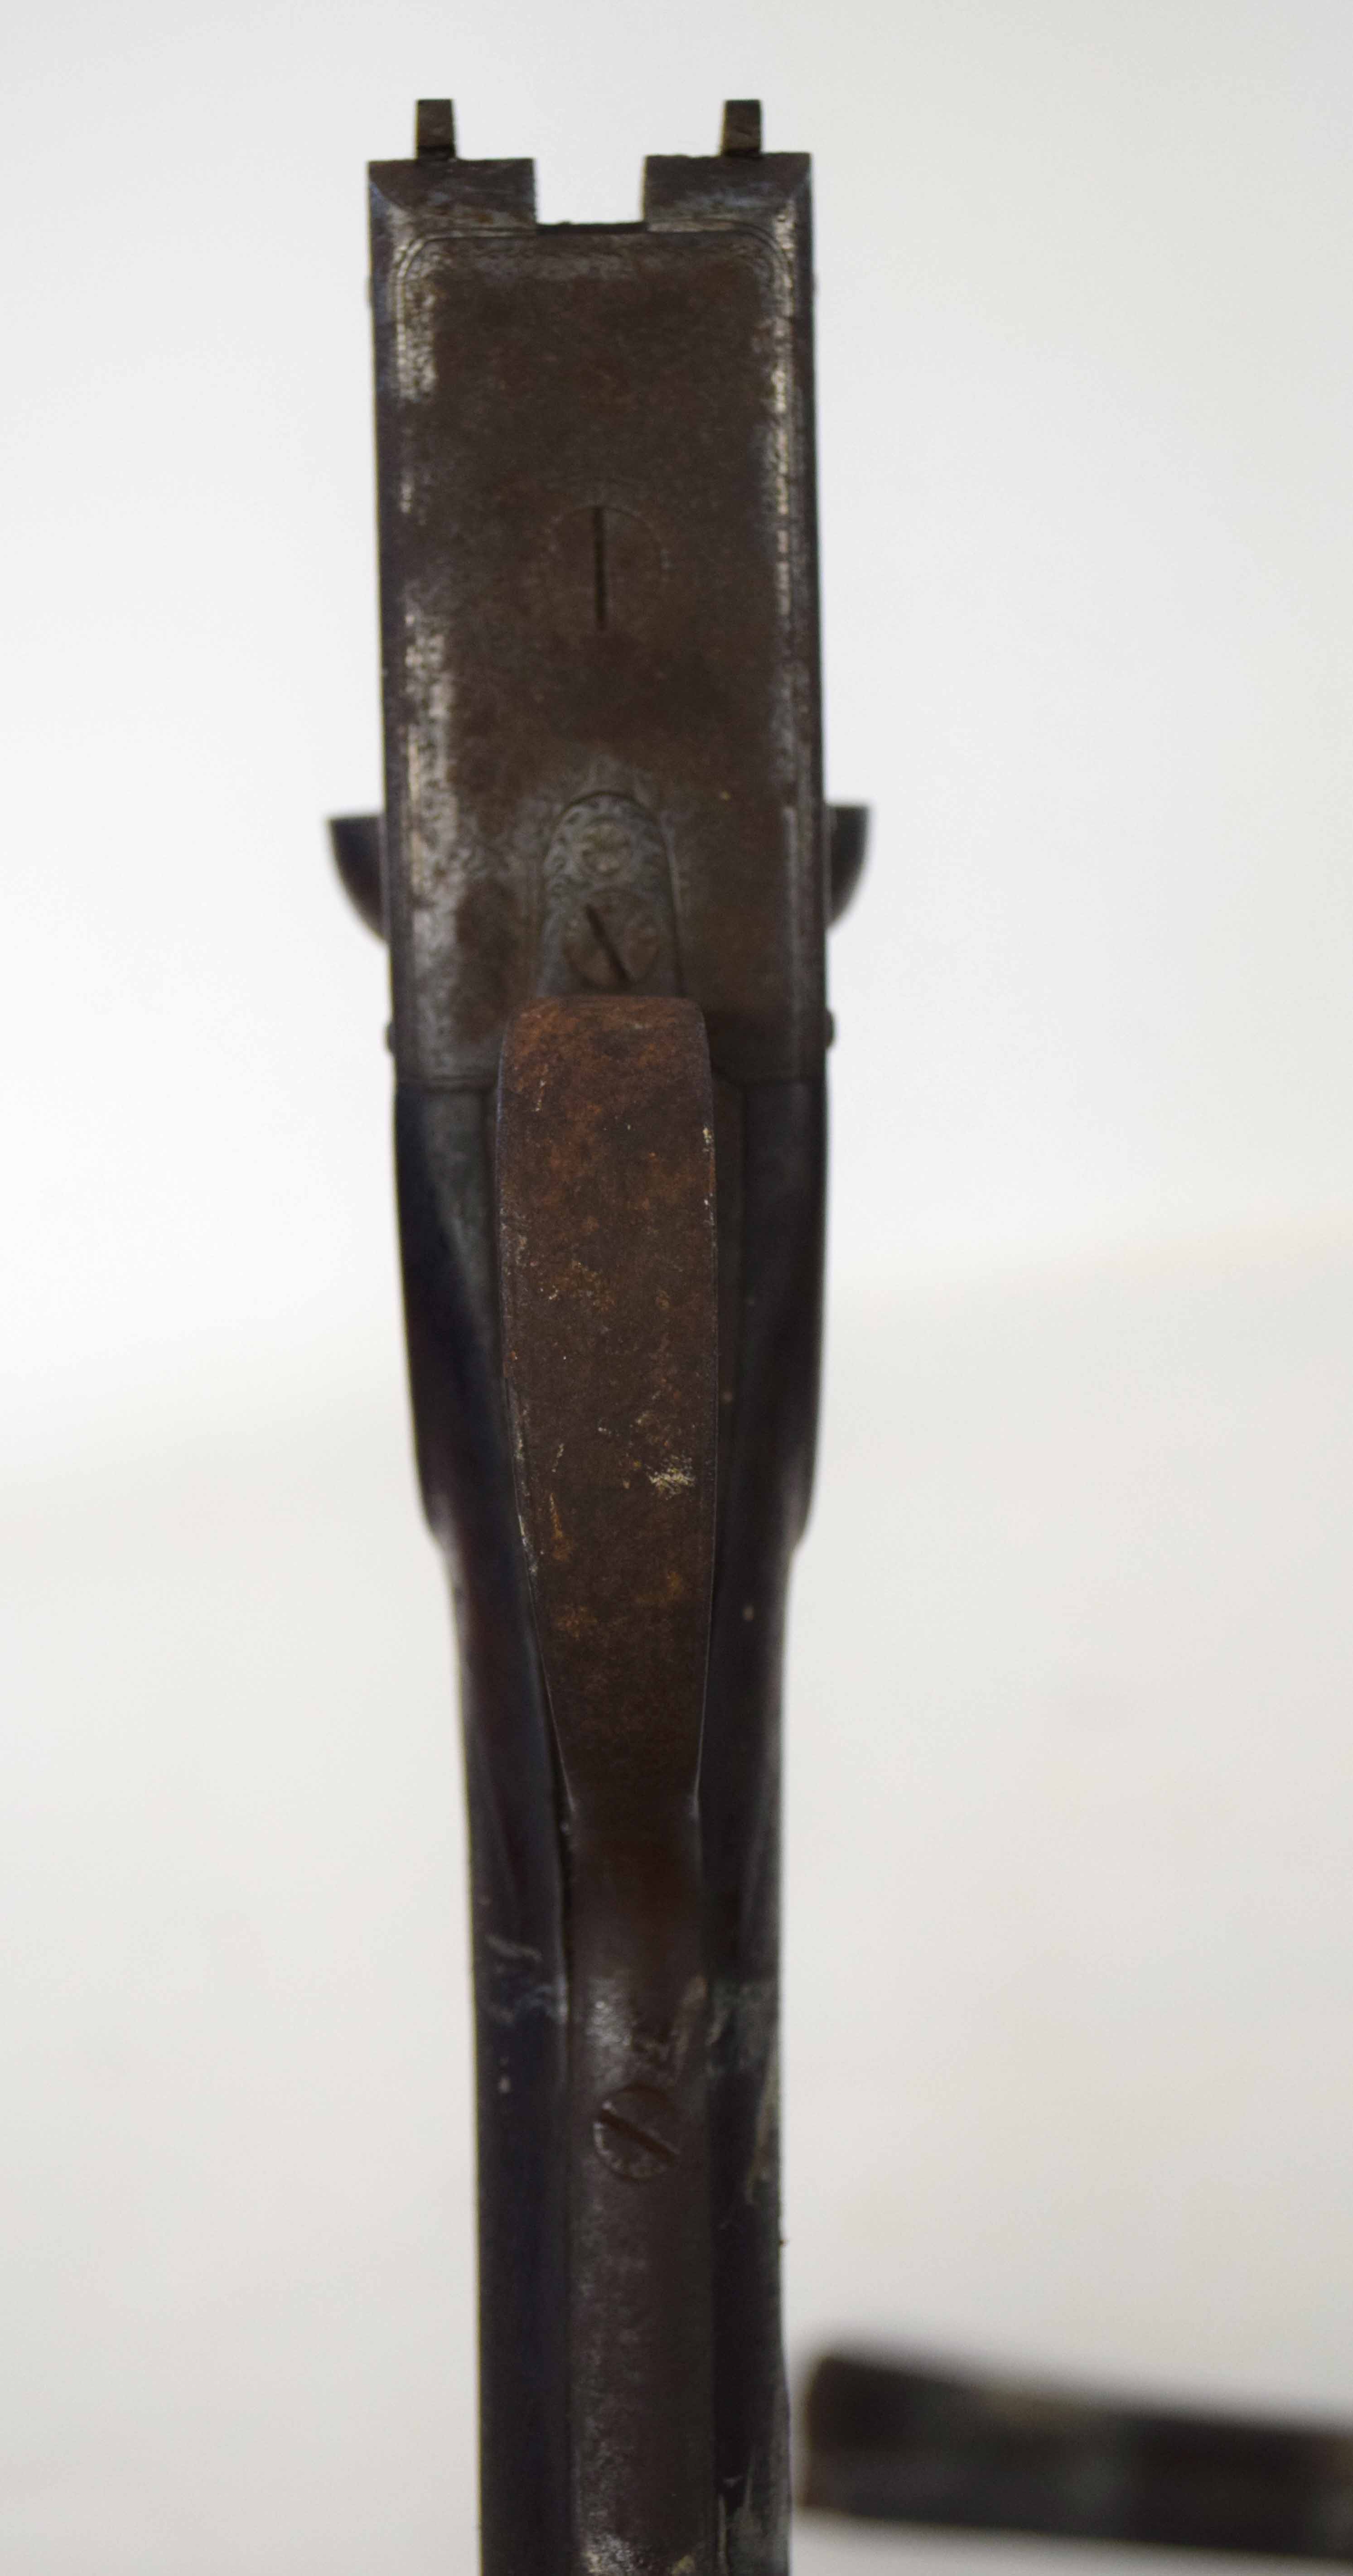 Stock and hand grip of a 20-bore side by side shotgun, made by "William Evans" (a/f) - Image 5 of 5